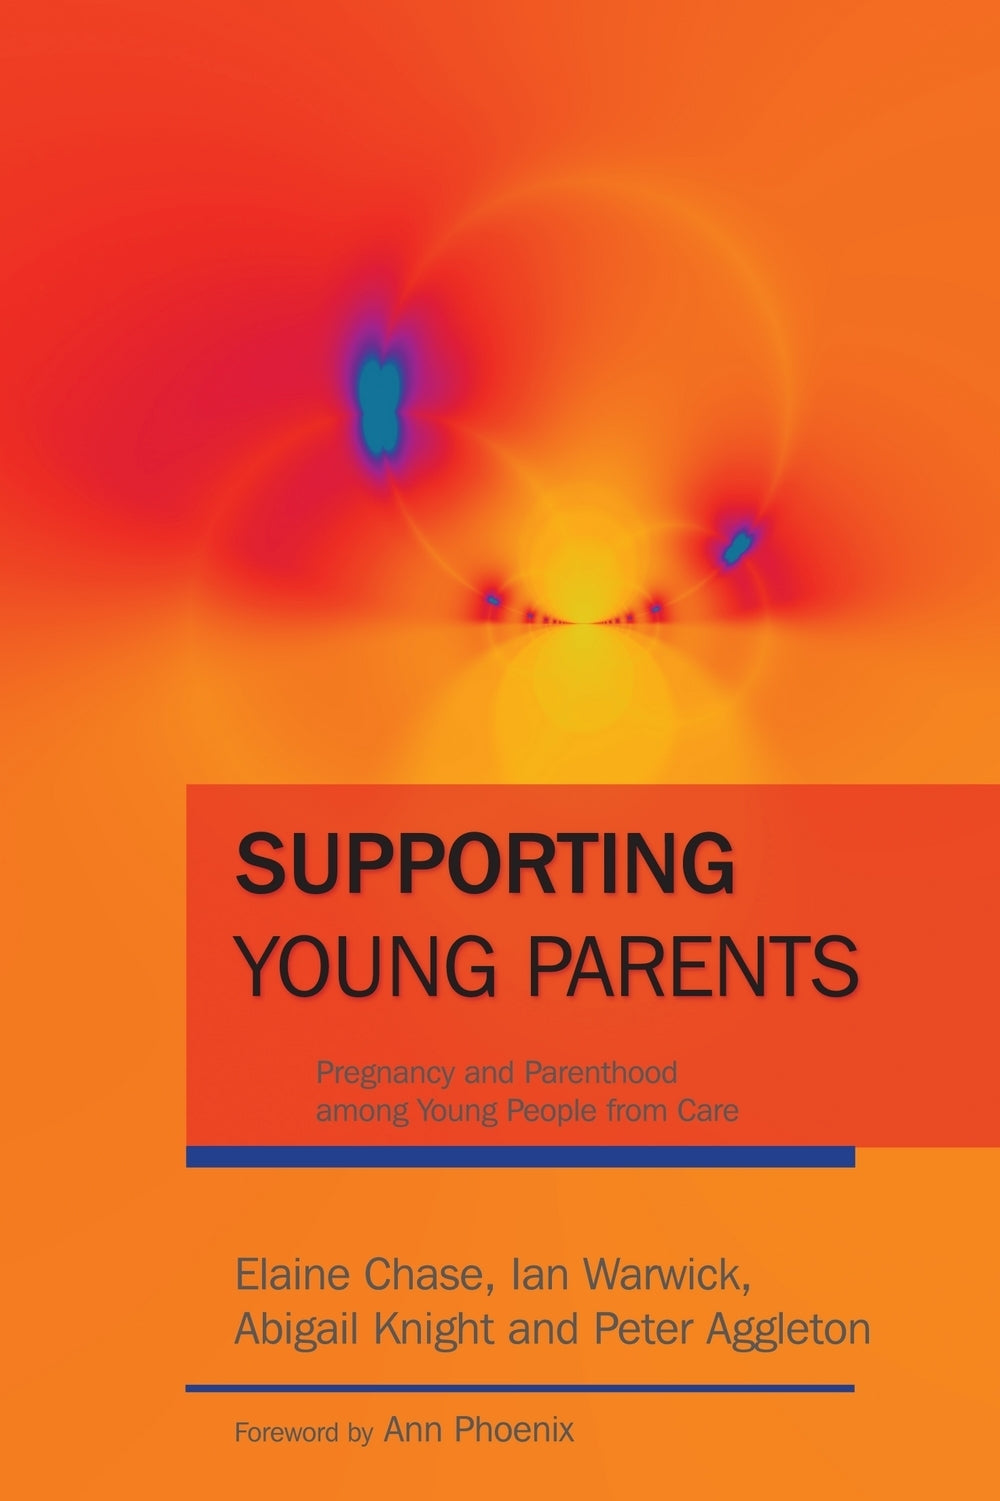 Supporting Young Parents by Ian Warwick, Abigail Knight, Elaine Chase, Peter Aggleton